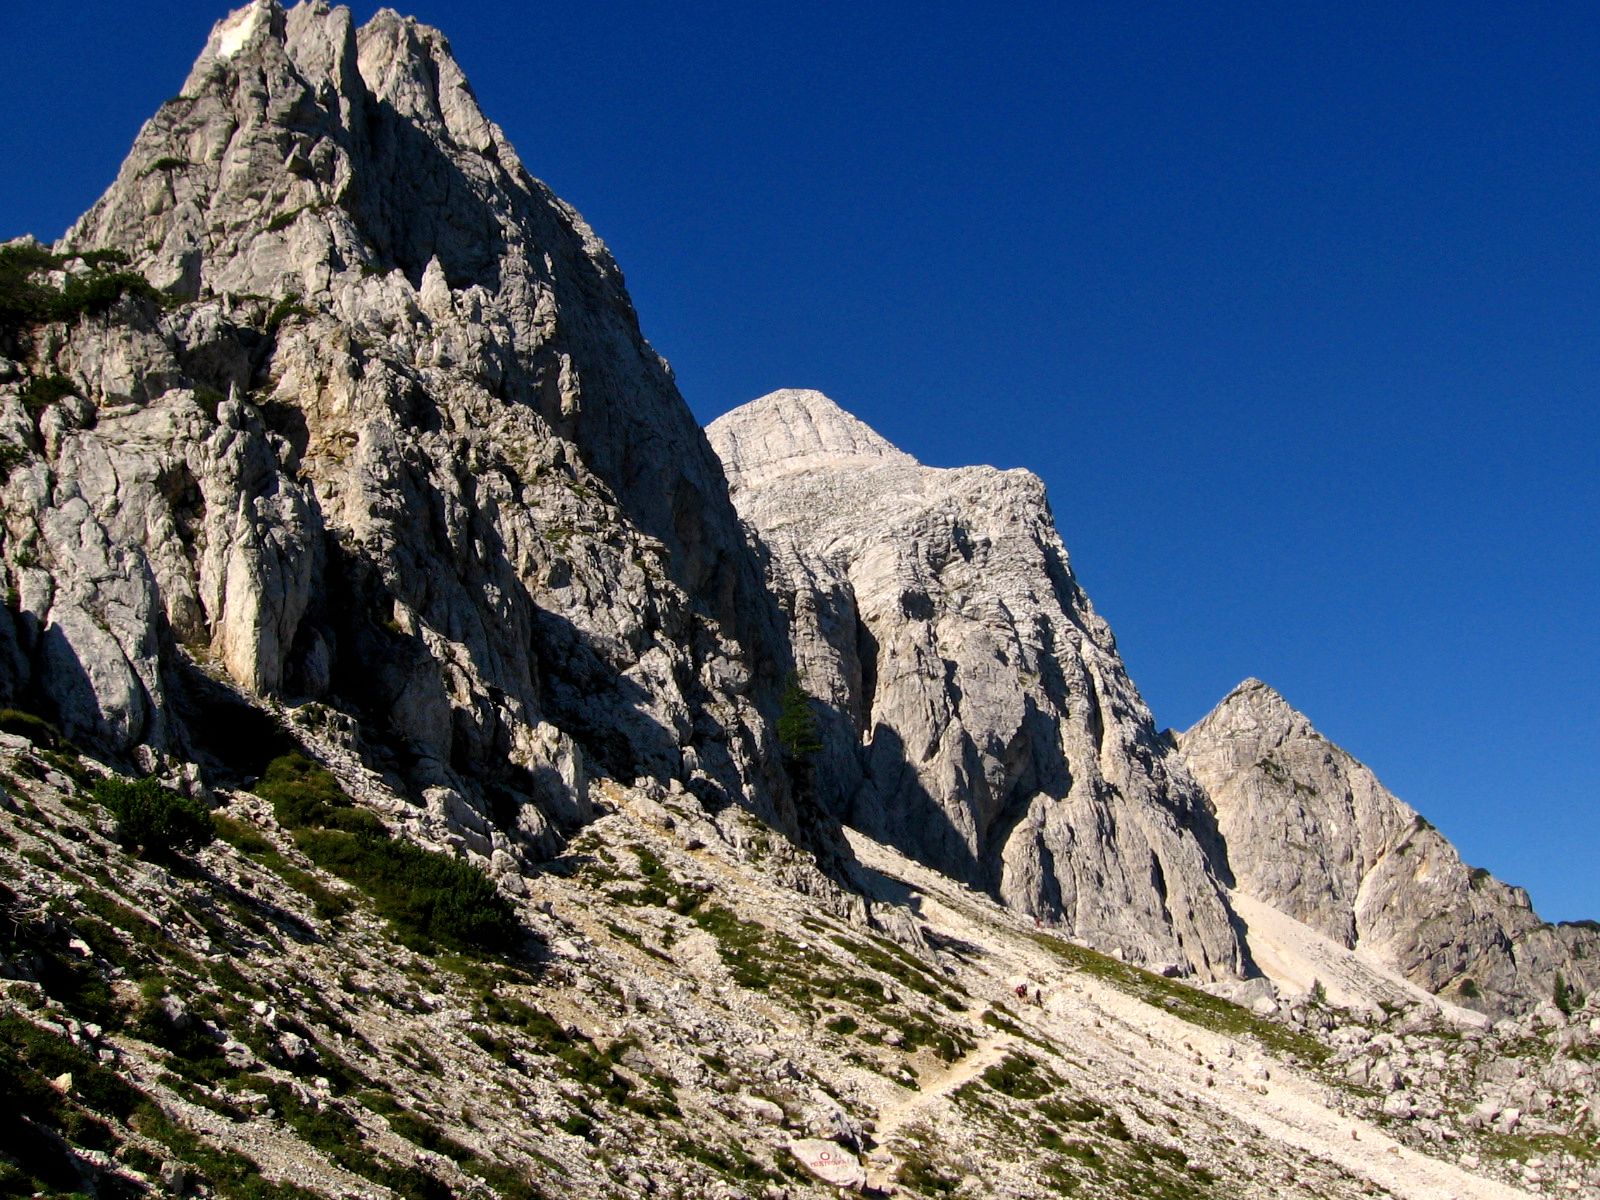 Vrsic is a starting point for mountain trail to Mojstrovka, easy access from the Vrsic pass brings you to the north wall and entrance of ferrata via Hanzova - Slovenia 